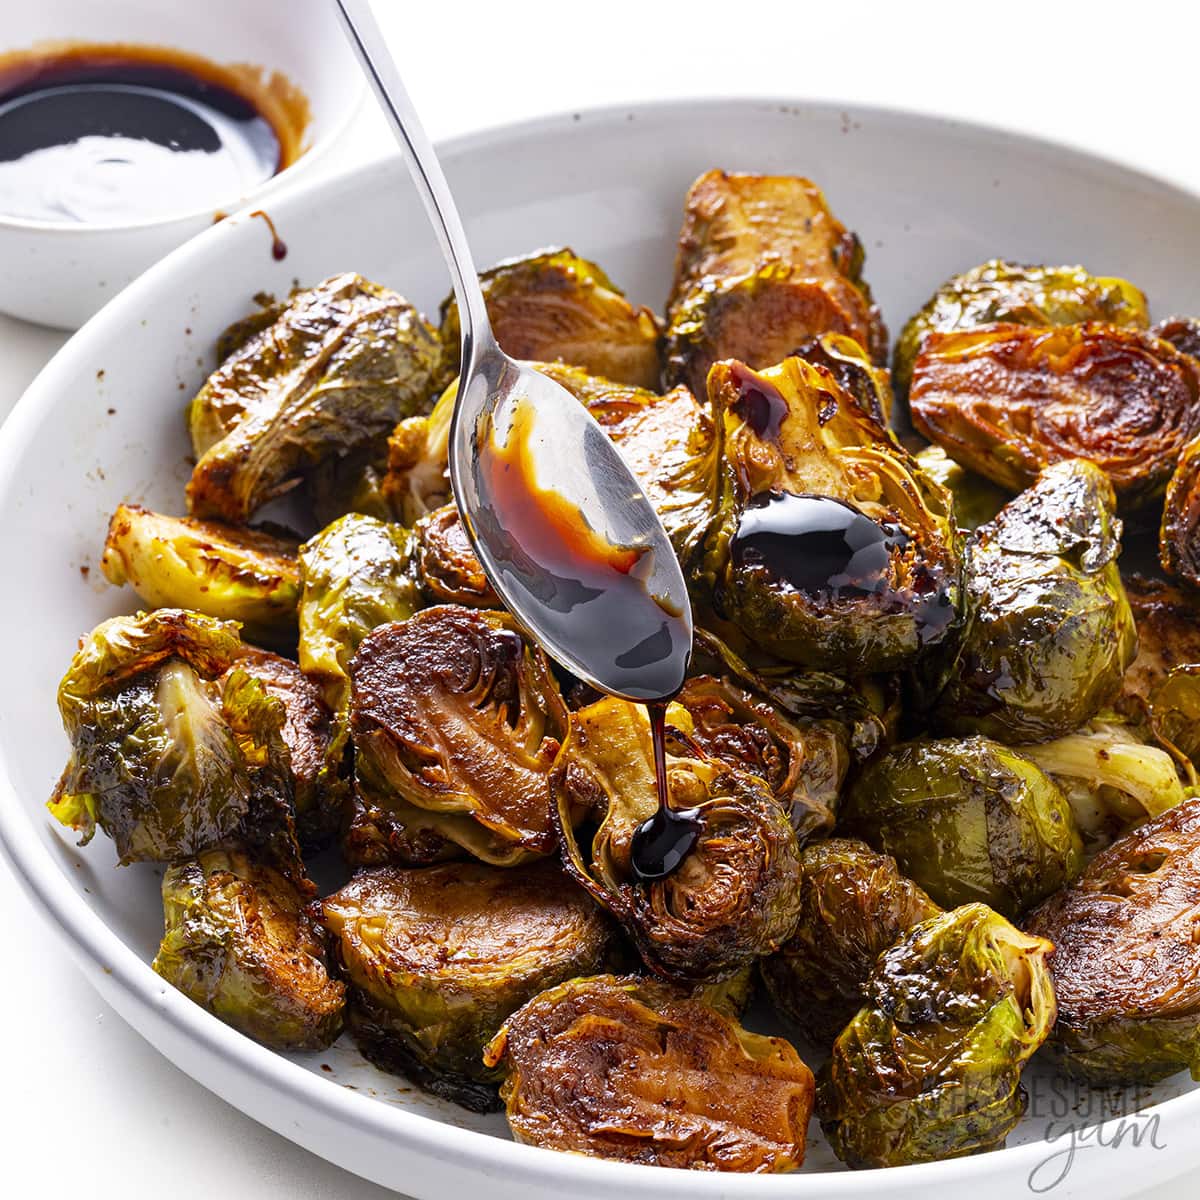 Crispy balsamic brussels sprouts in a bowl, being drizzled with balsamic glaze from a spoon.